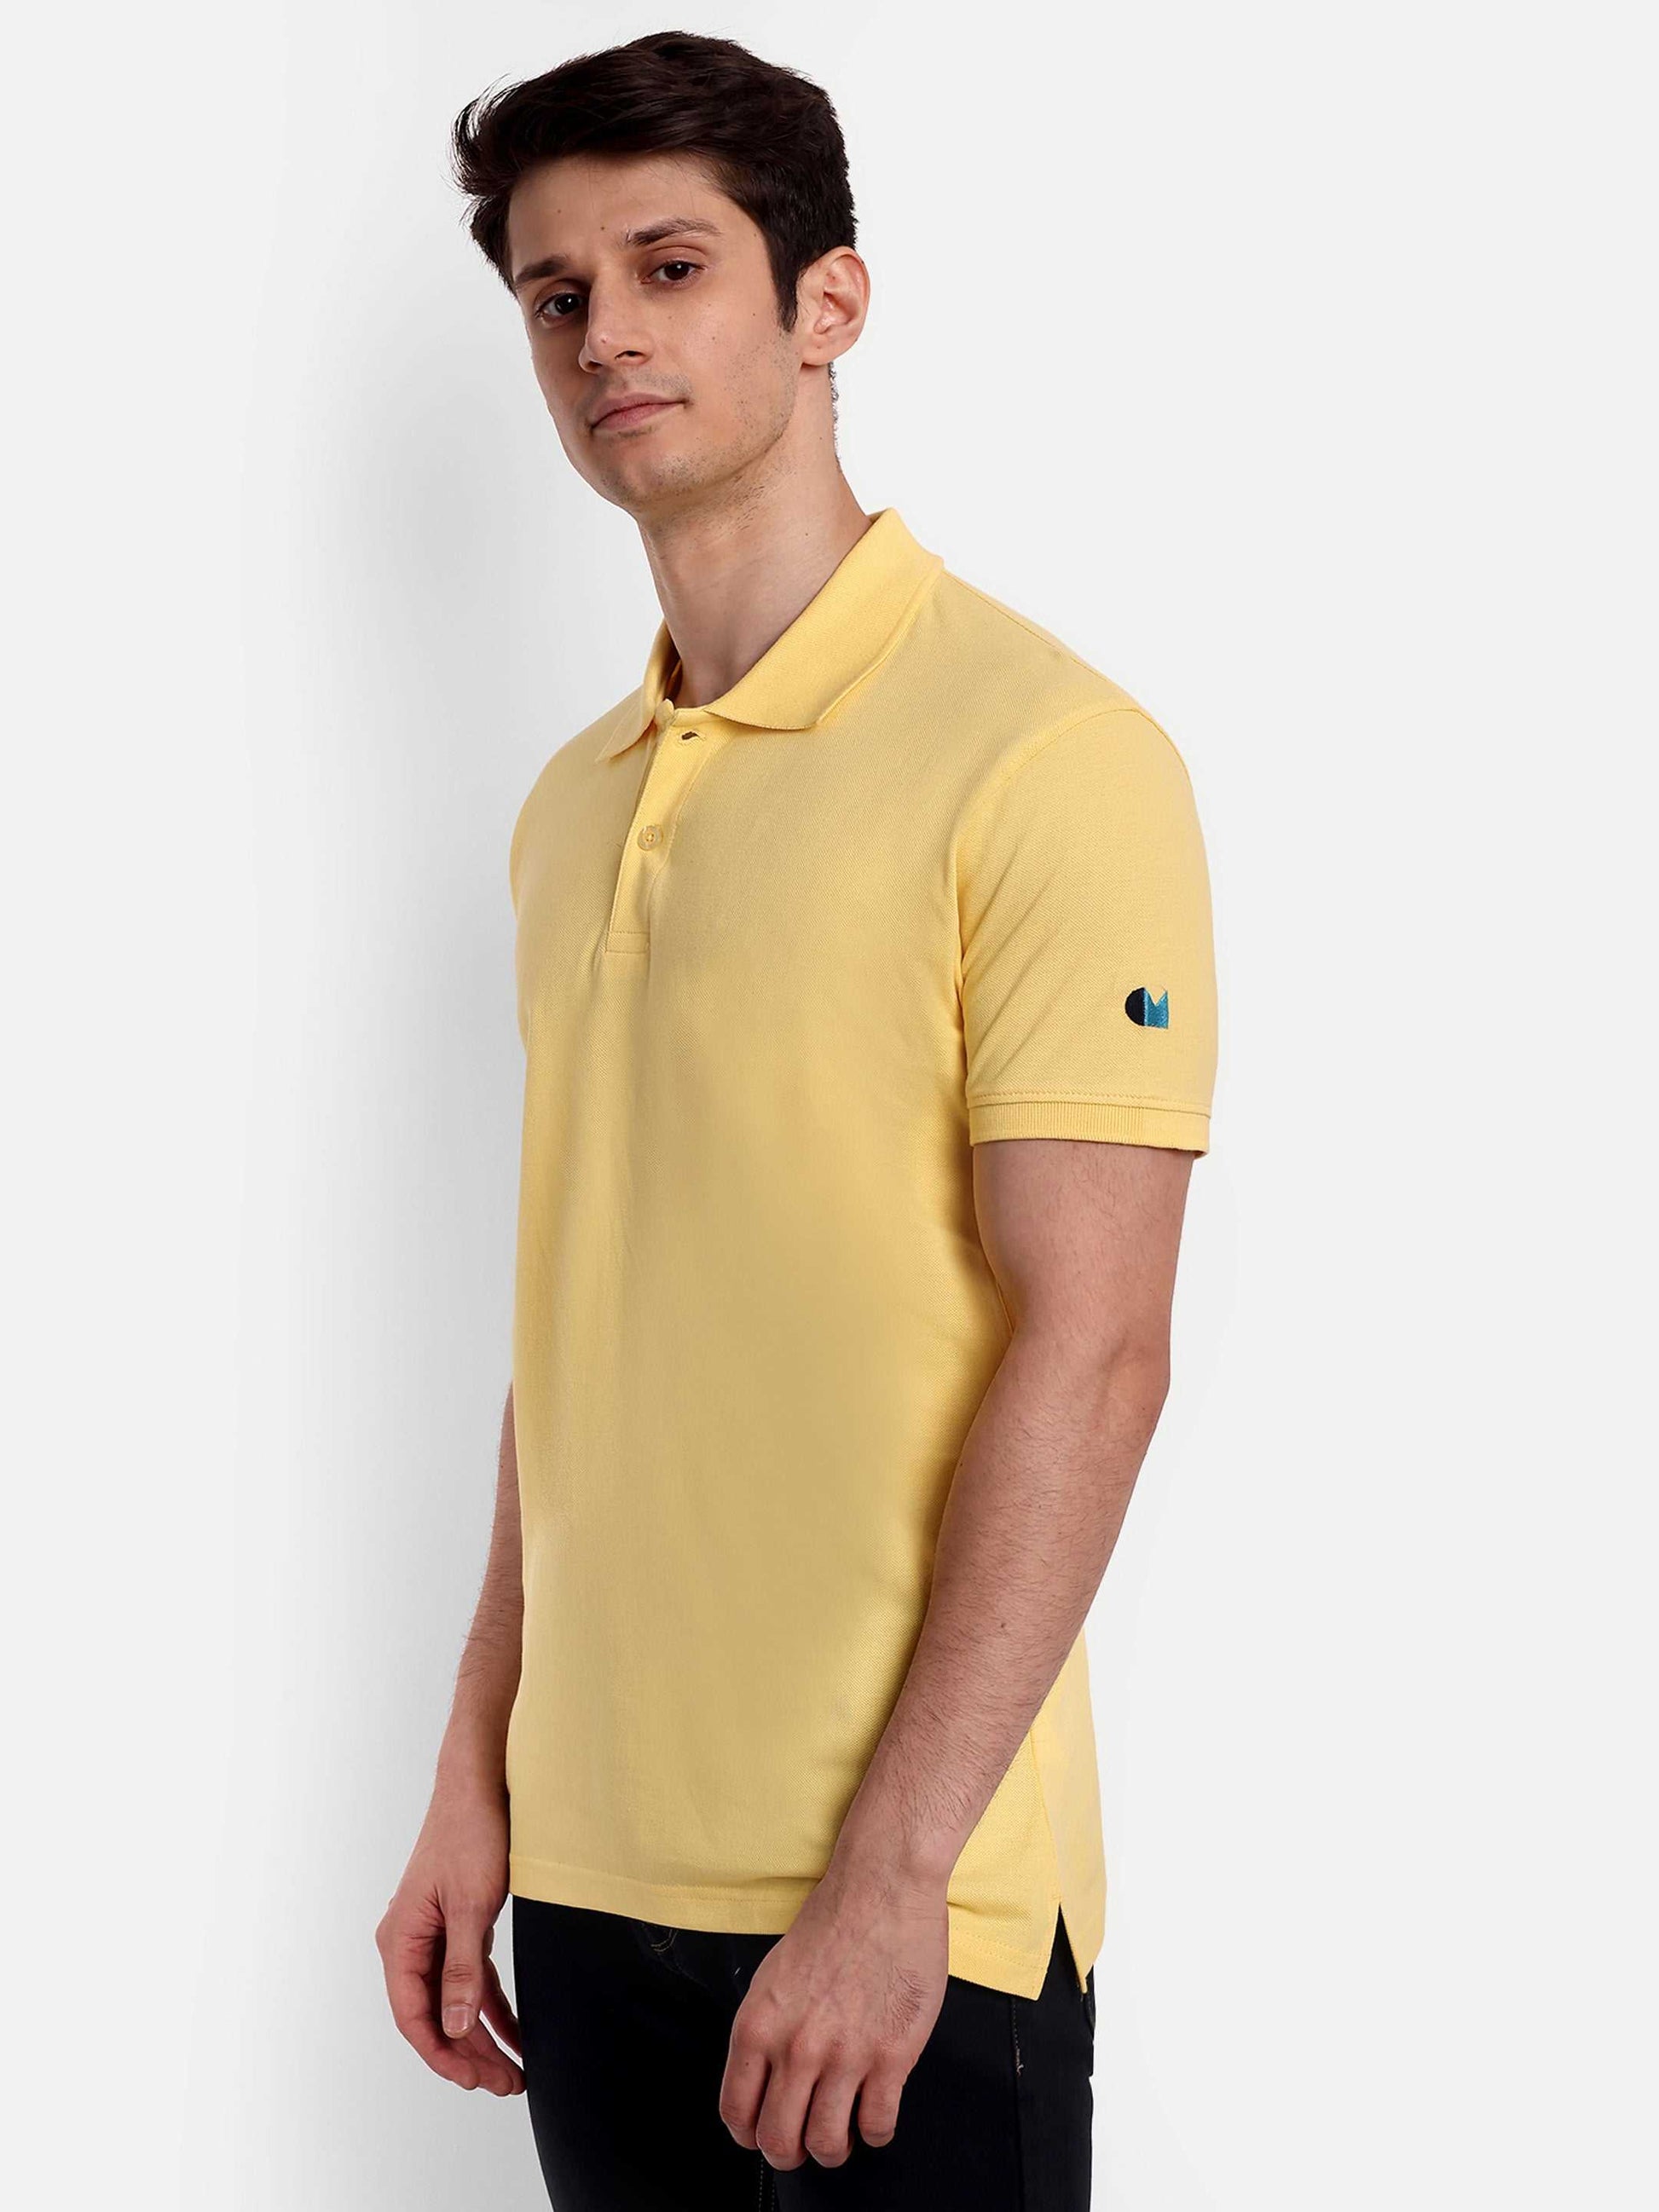 Buy yellow polo t-shirts online